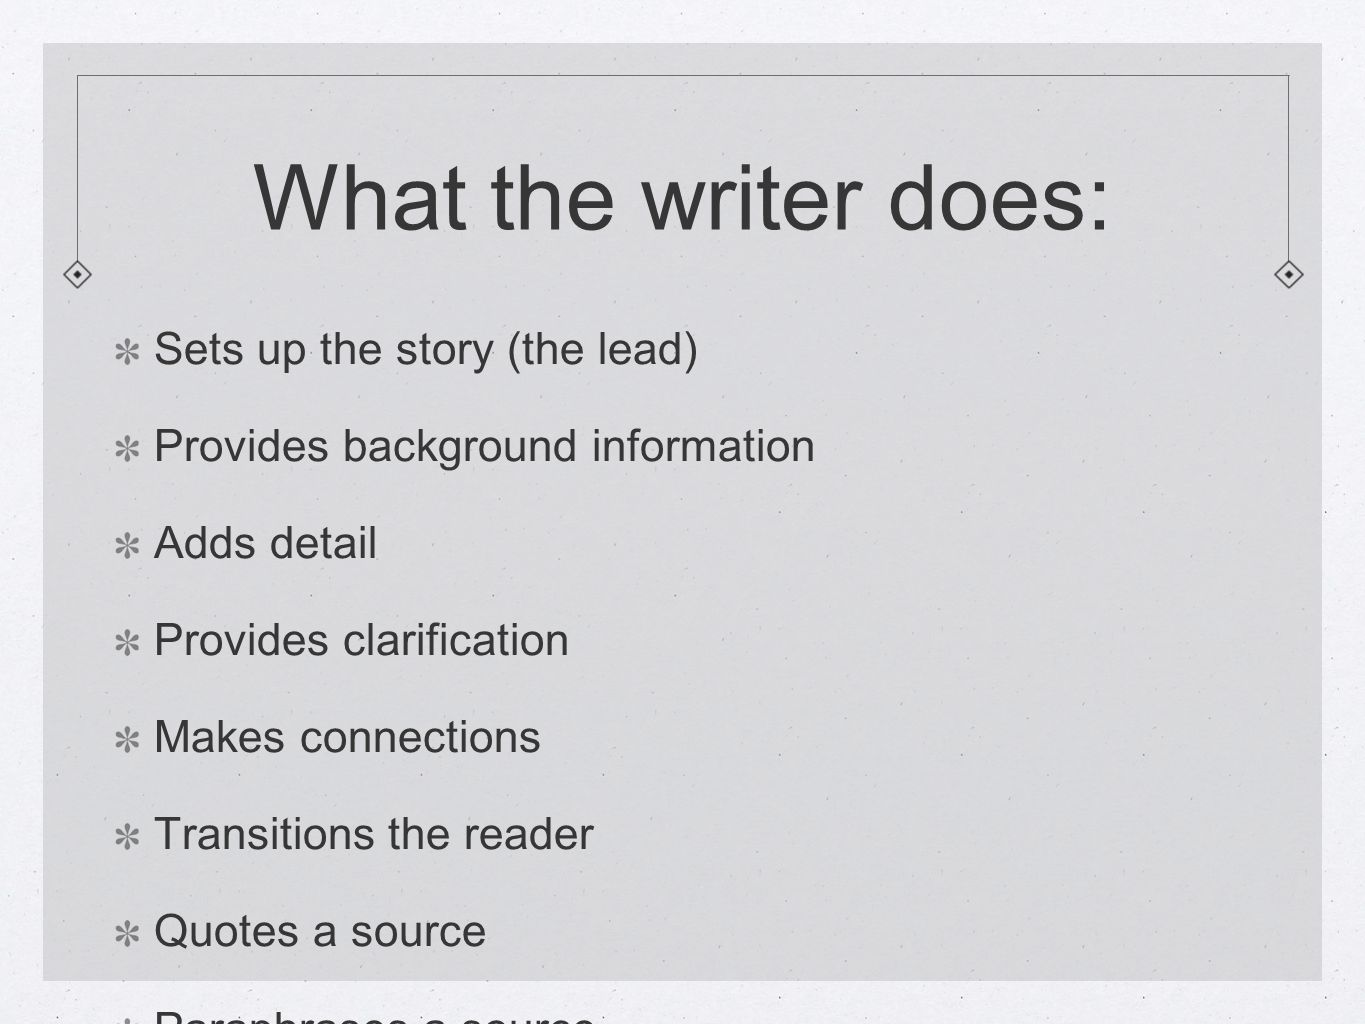 What the writer does: Sets up the story (the lead) Provides background information Adds detail Provides clarification Makes connections Transitions the reader Quotes a source Paraphrases a source Wraps up the story (concludes)